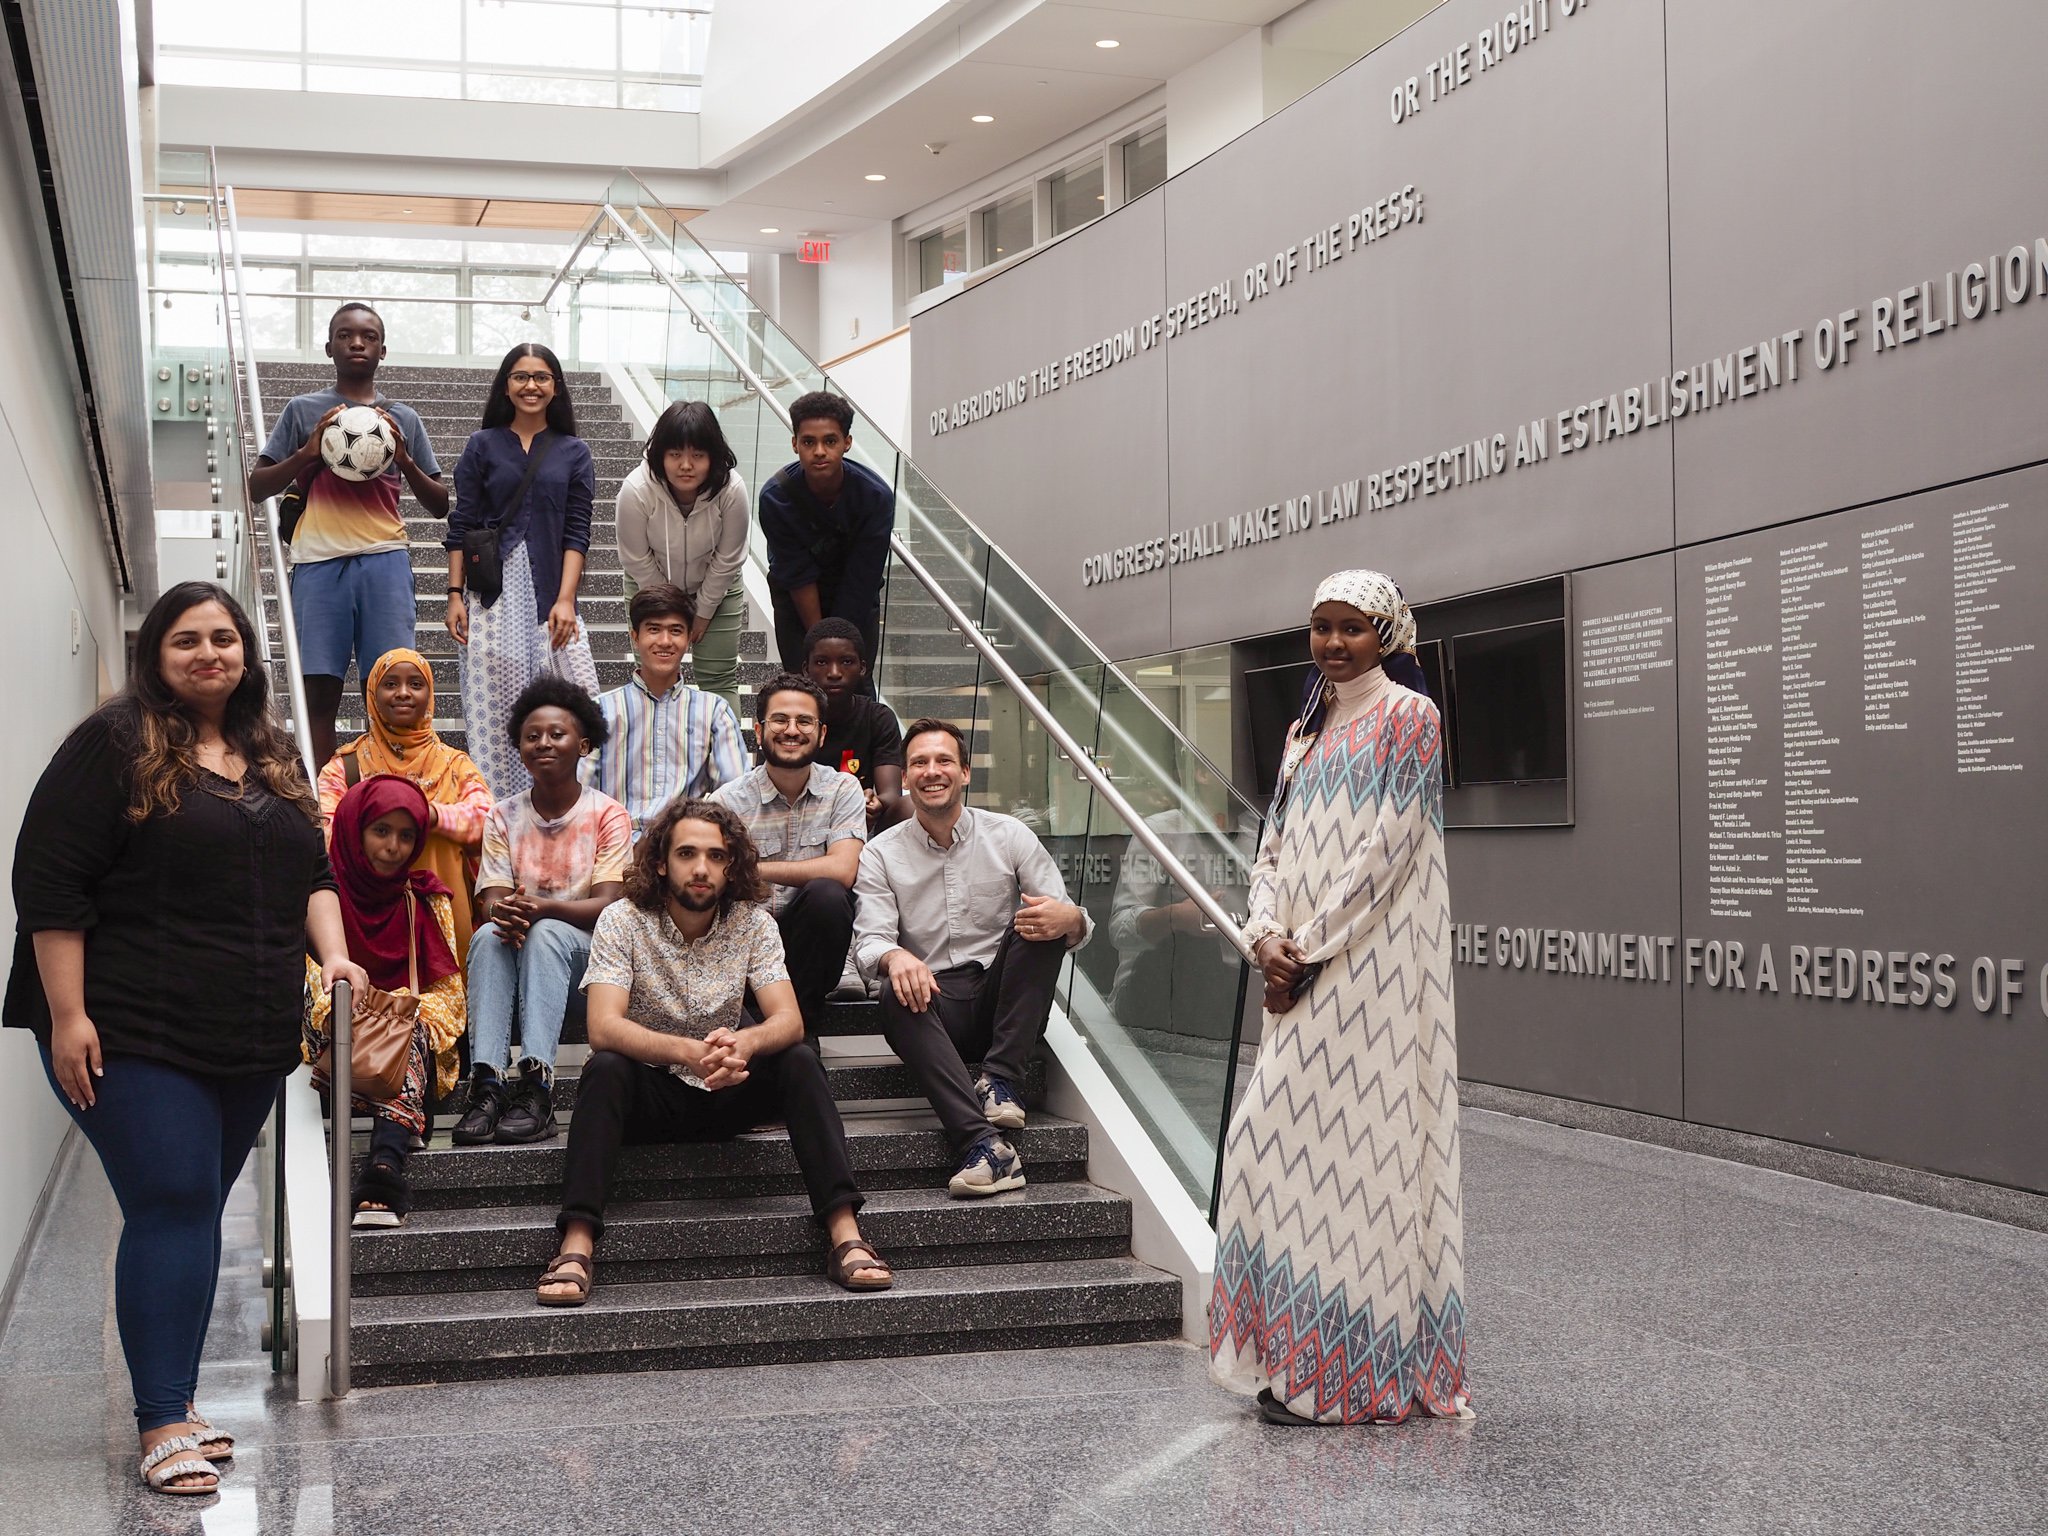 2022 Syracuse Narratio Fellowship cohort gathers together on the stairs in the Newhouse School